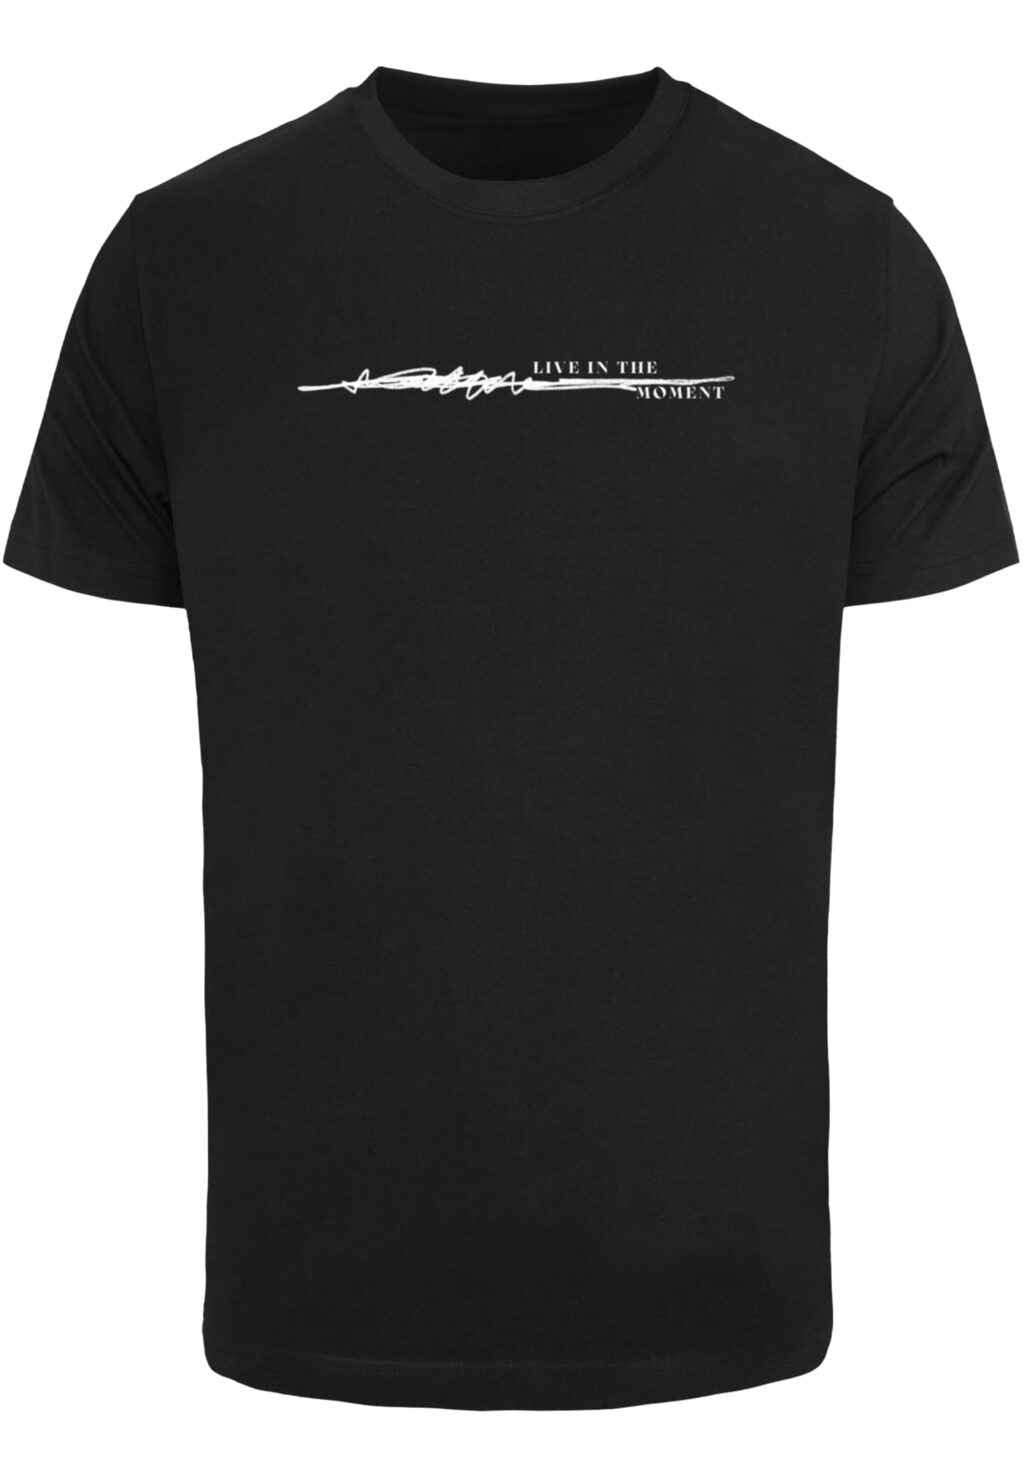 Live In The Moment Tee black MT3038